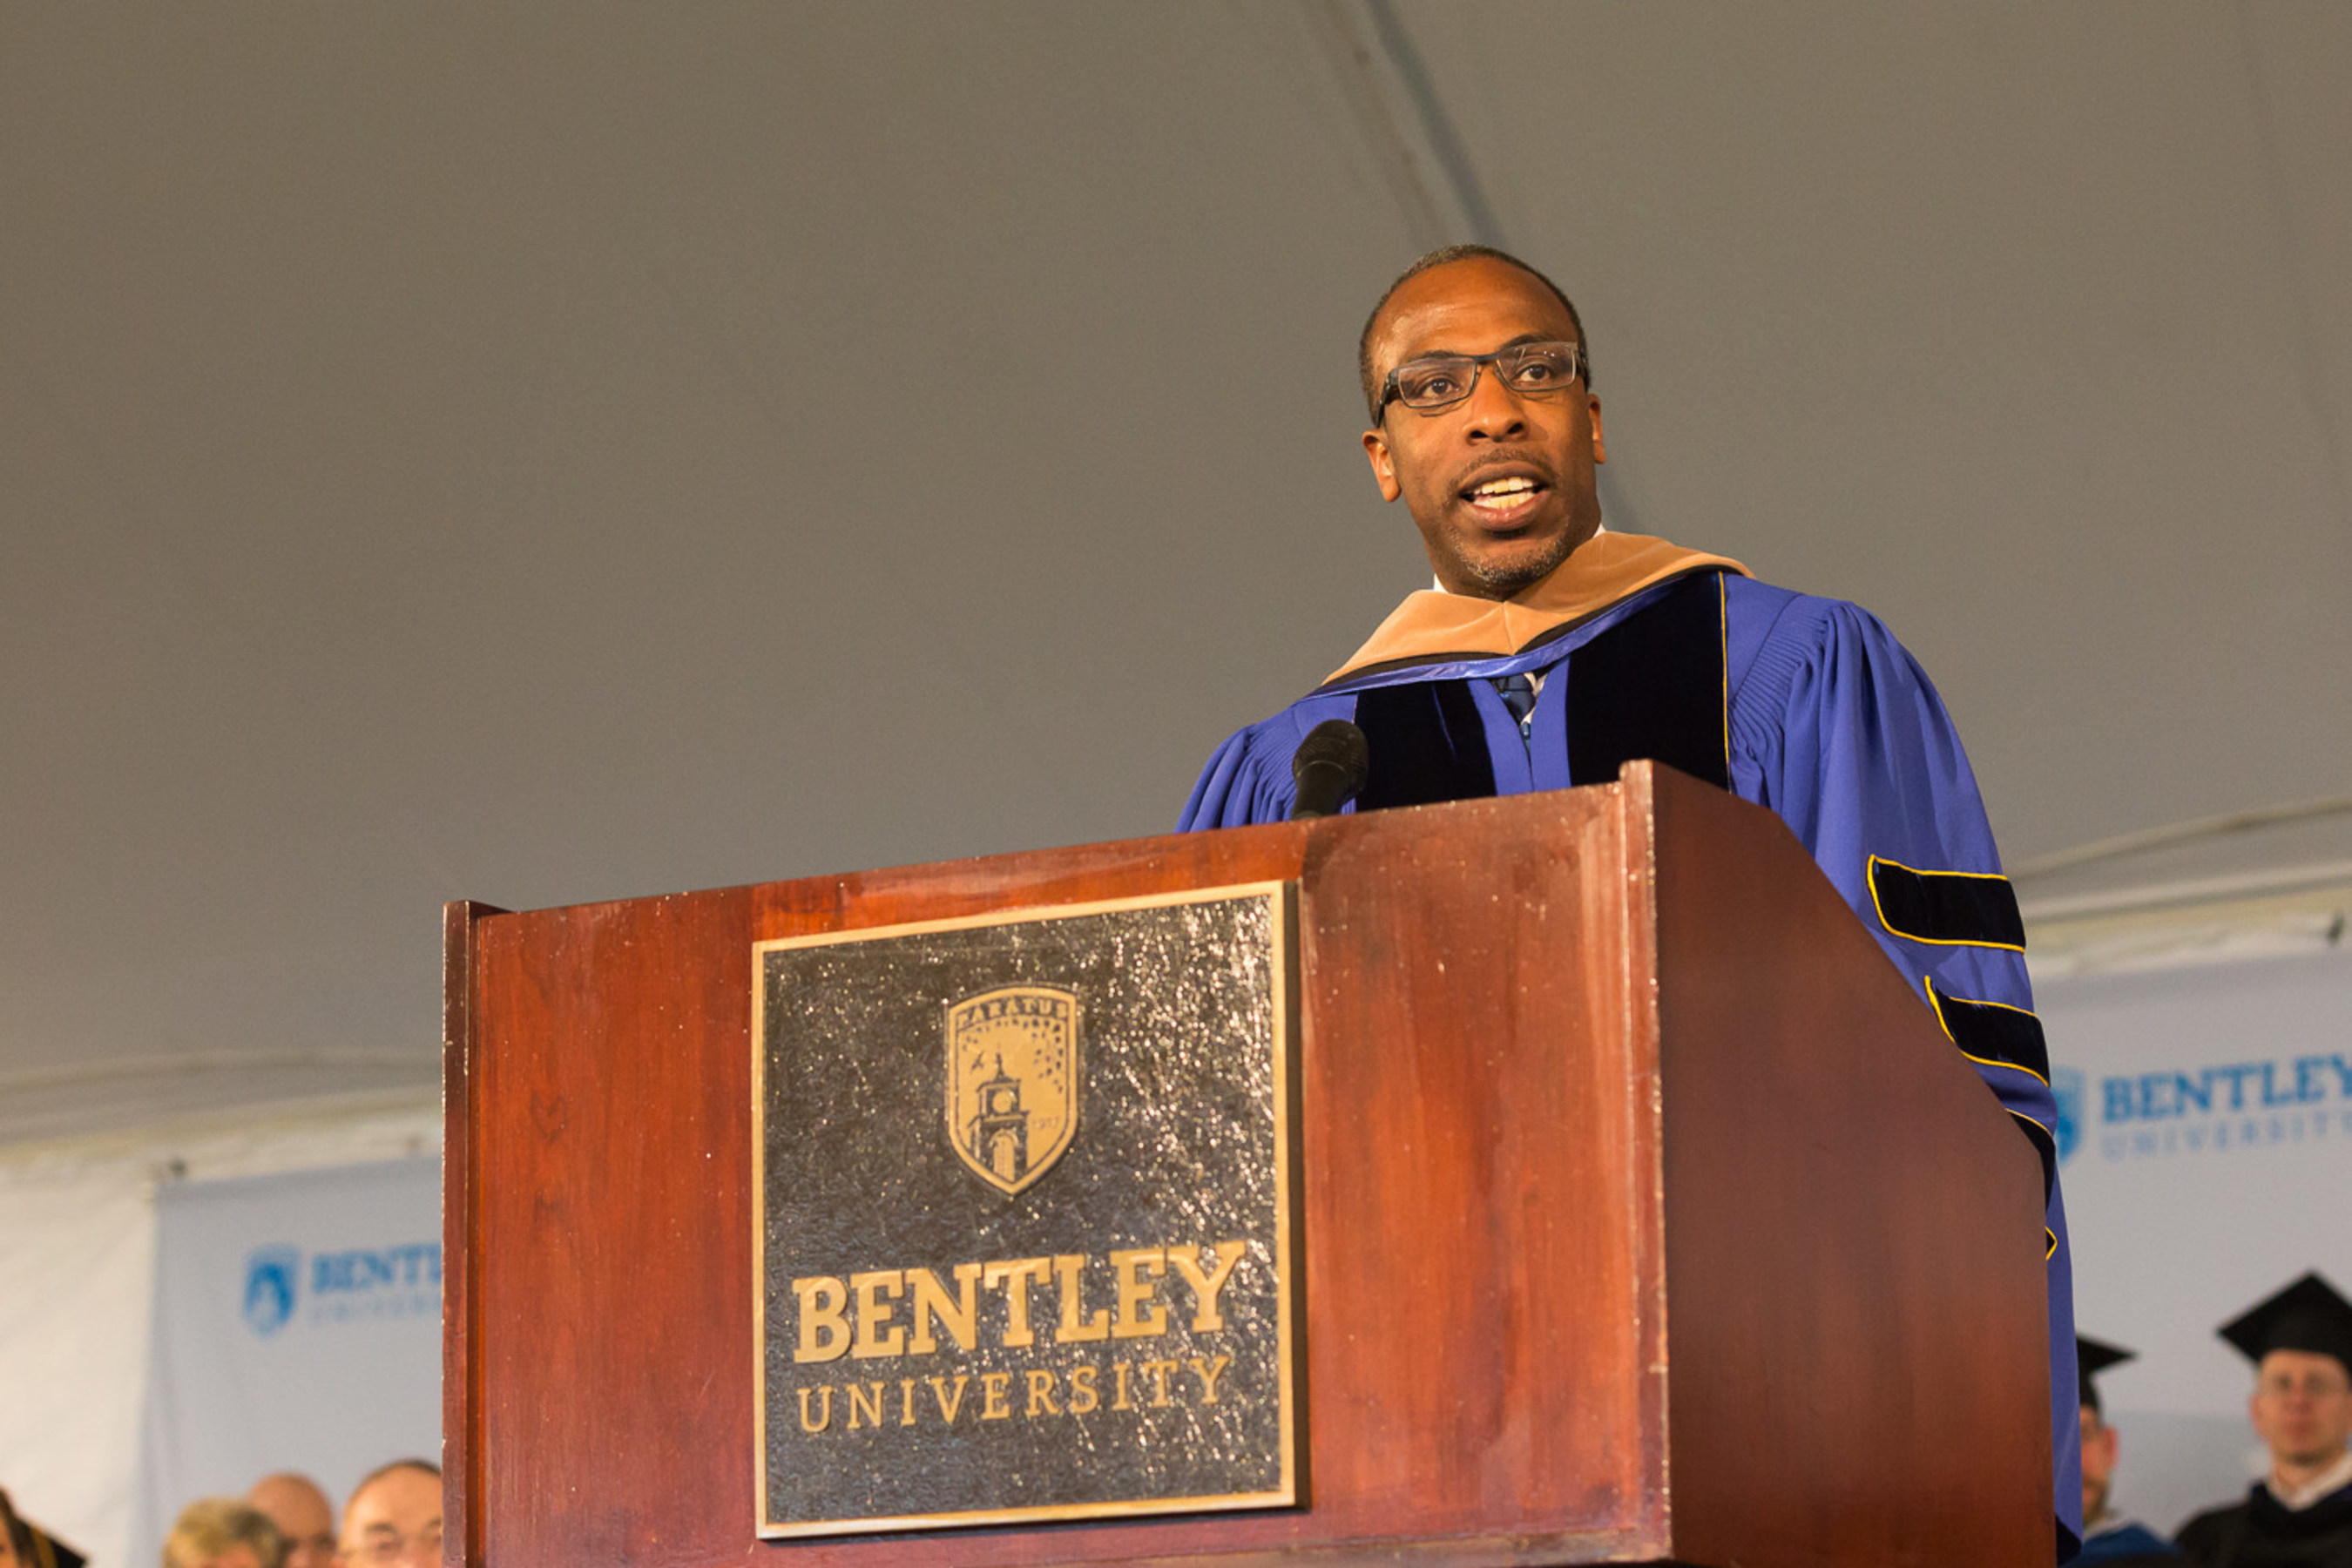 Corey Thomas, president and CEO of Rapid7 security software firm, delivered the keynote address at the Bentley University Graduate School of Business 41st commencement ceremony.